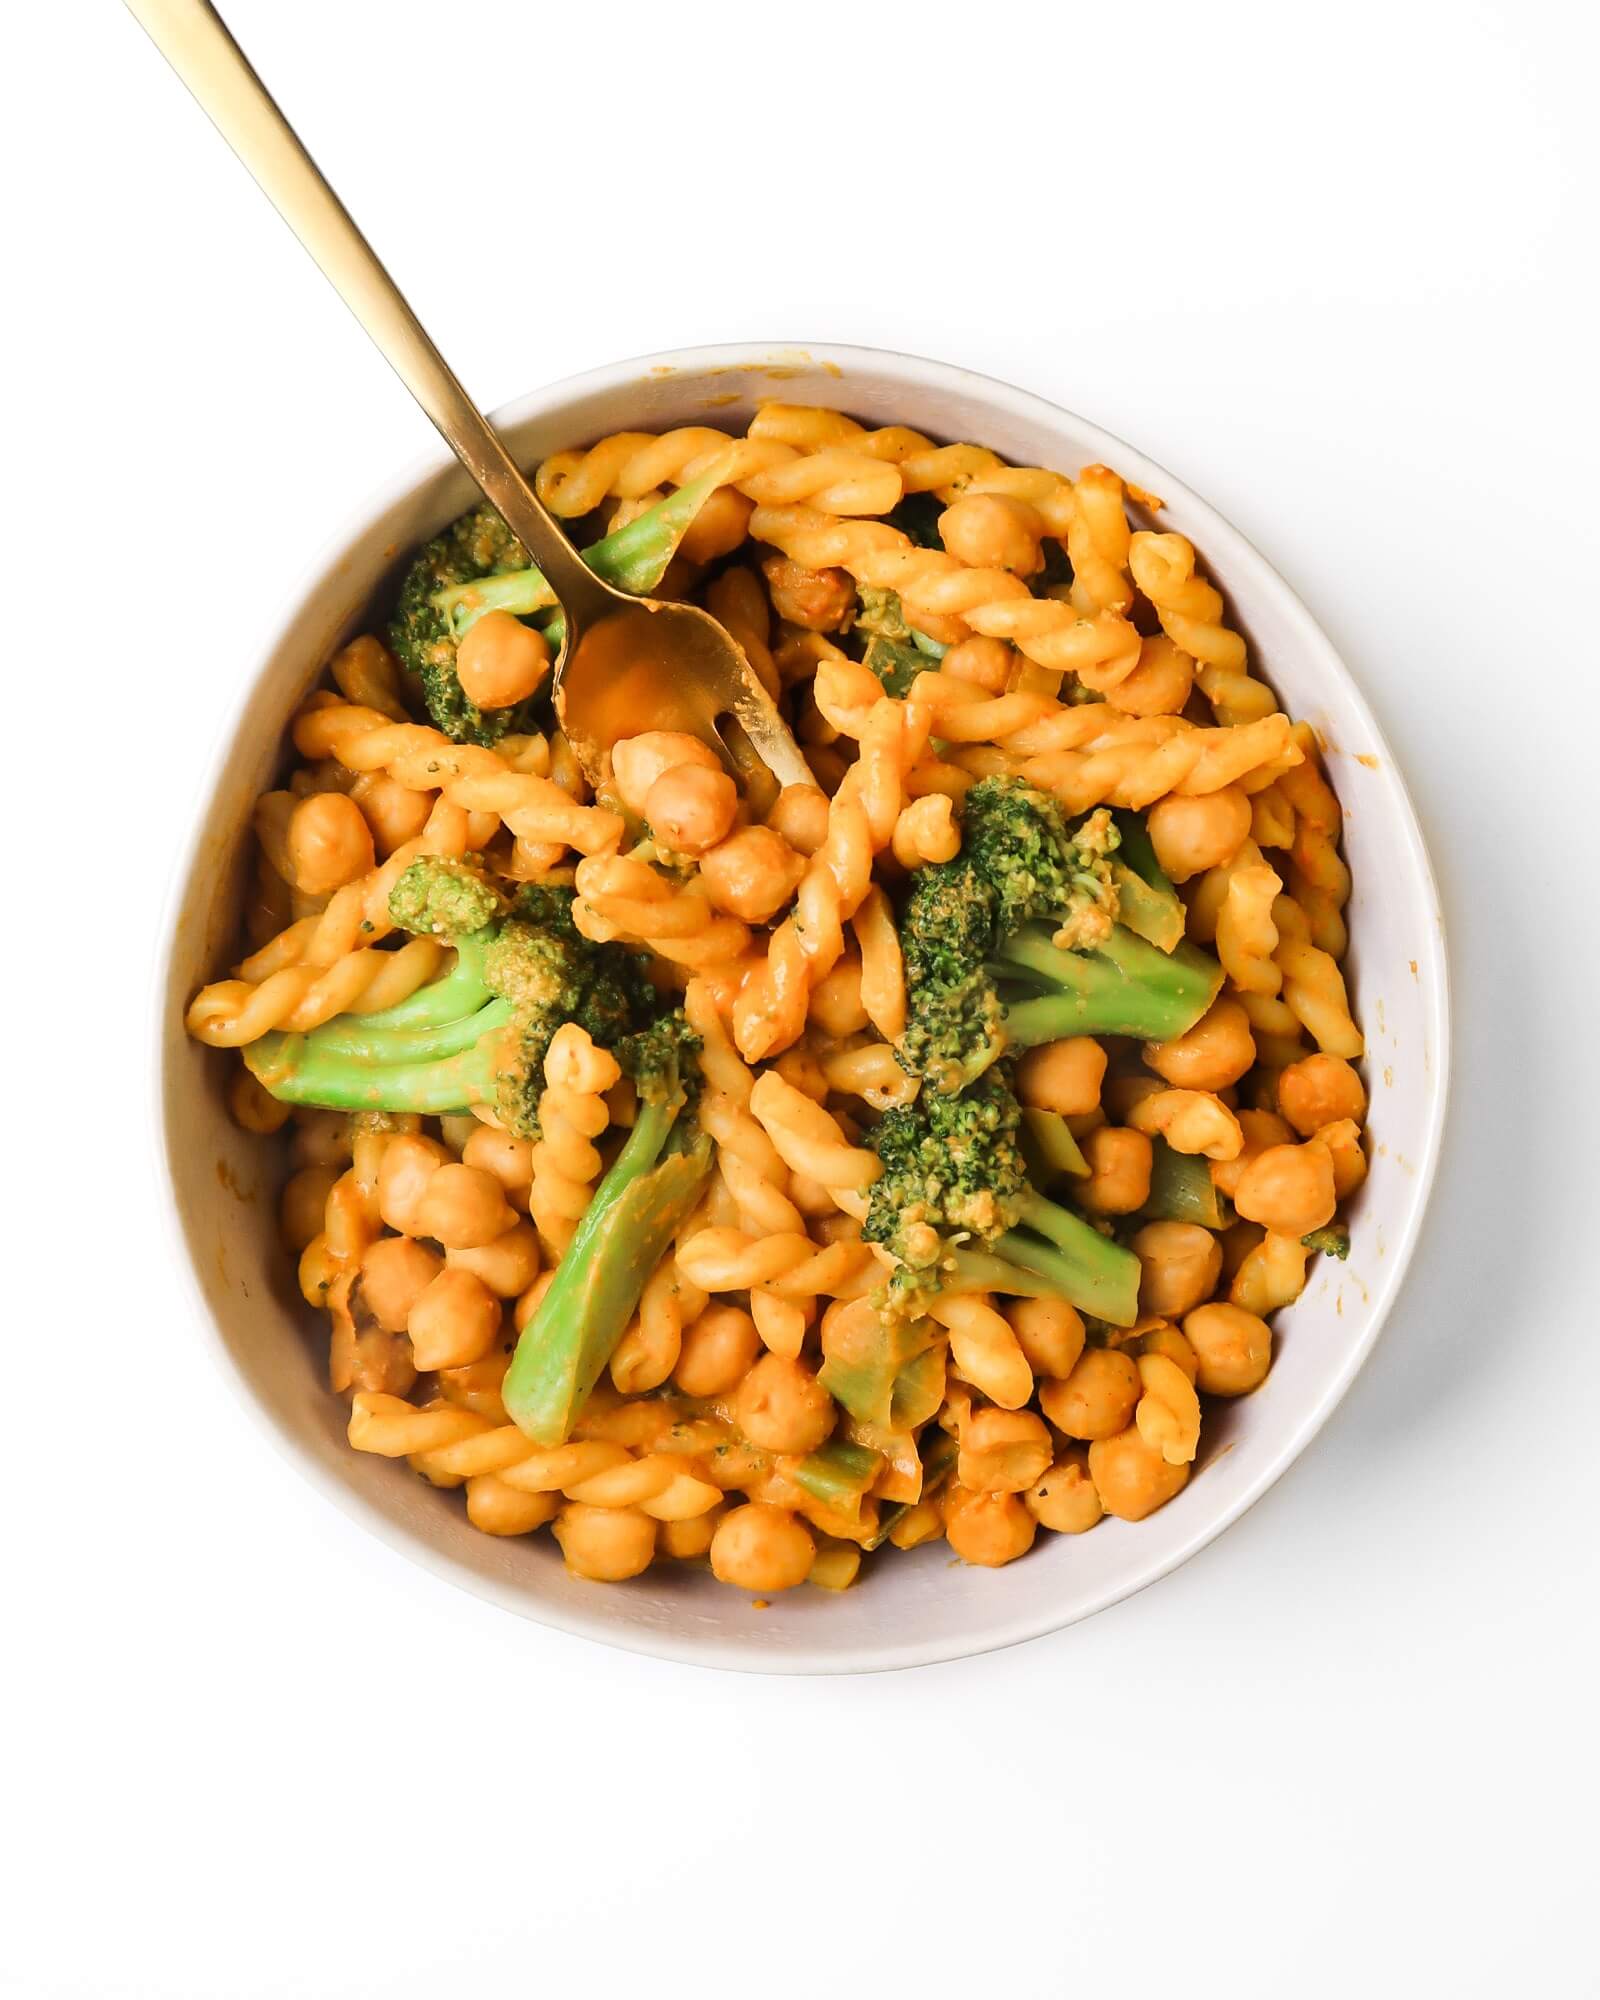 Gemelli noodles in an orange-brown sauce with broccoli florets and chickpeas.